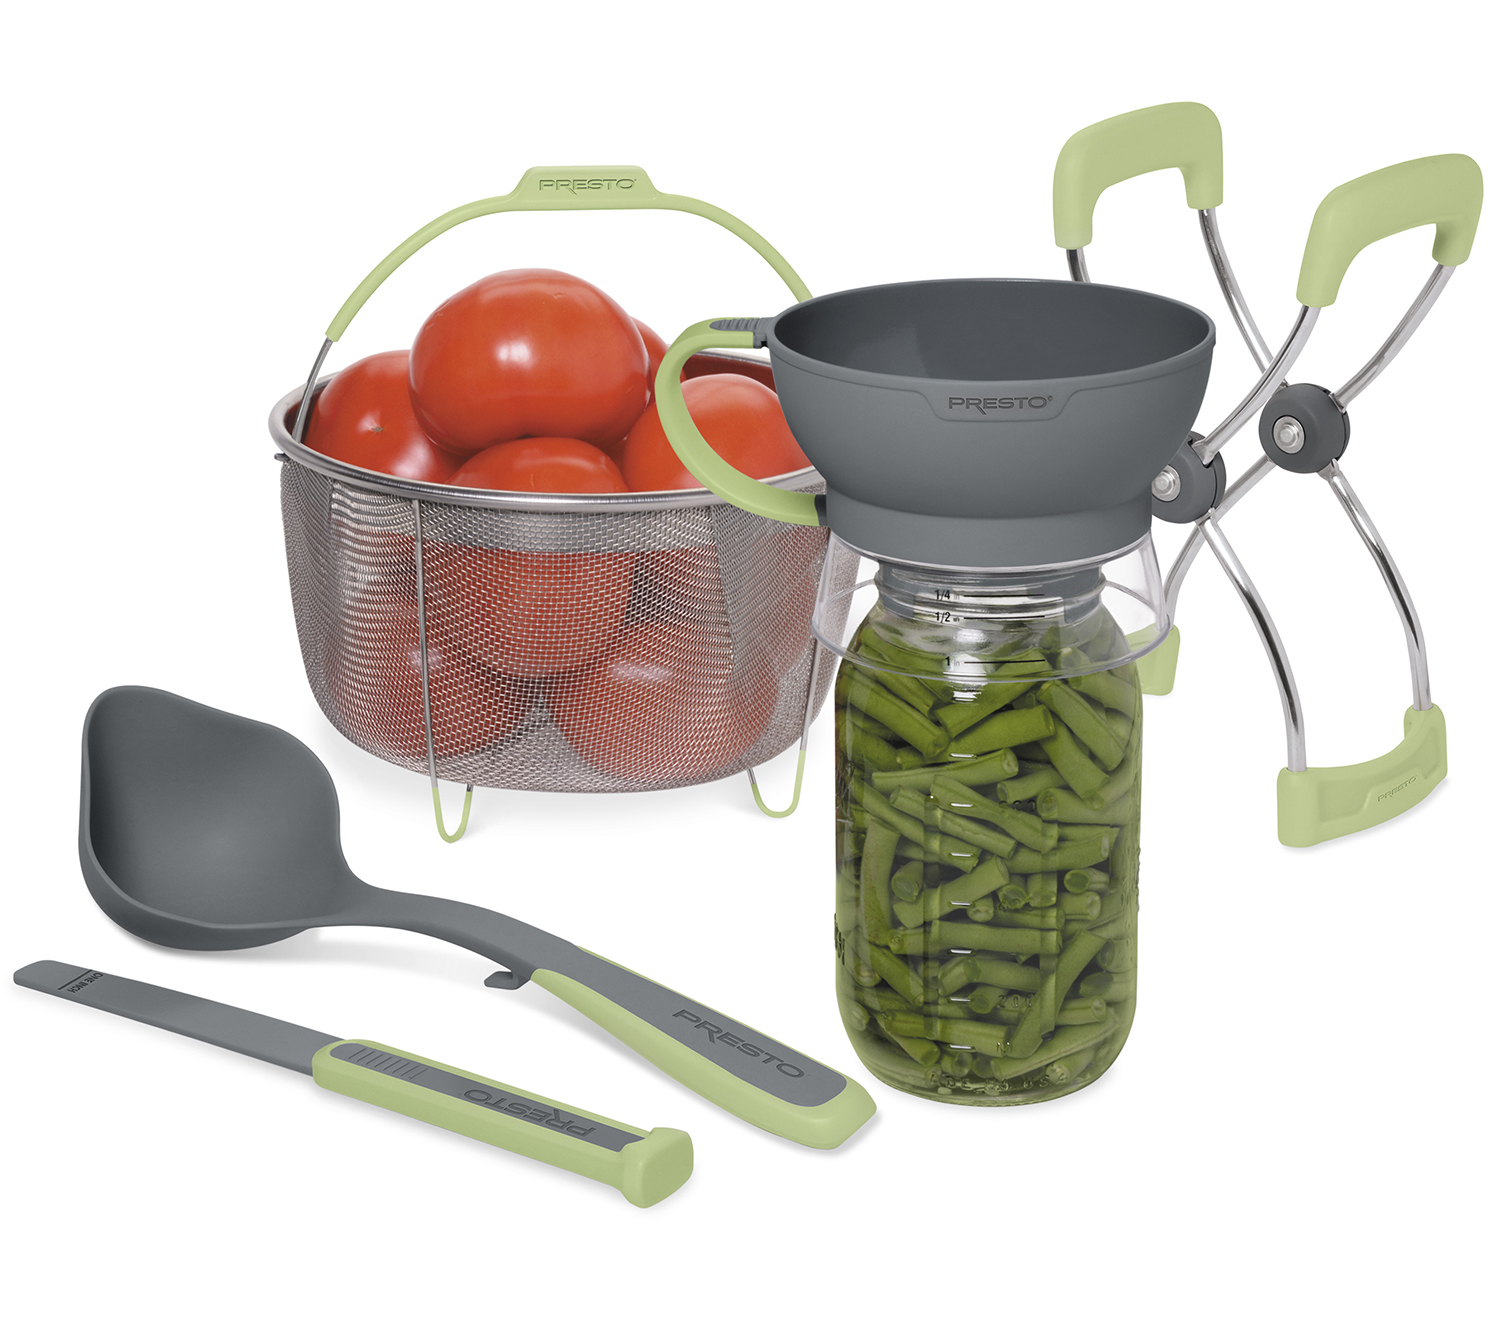 Canning Kit for Beginners 6-Piece Set Ball Canning Kit Tools, Green